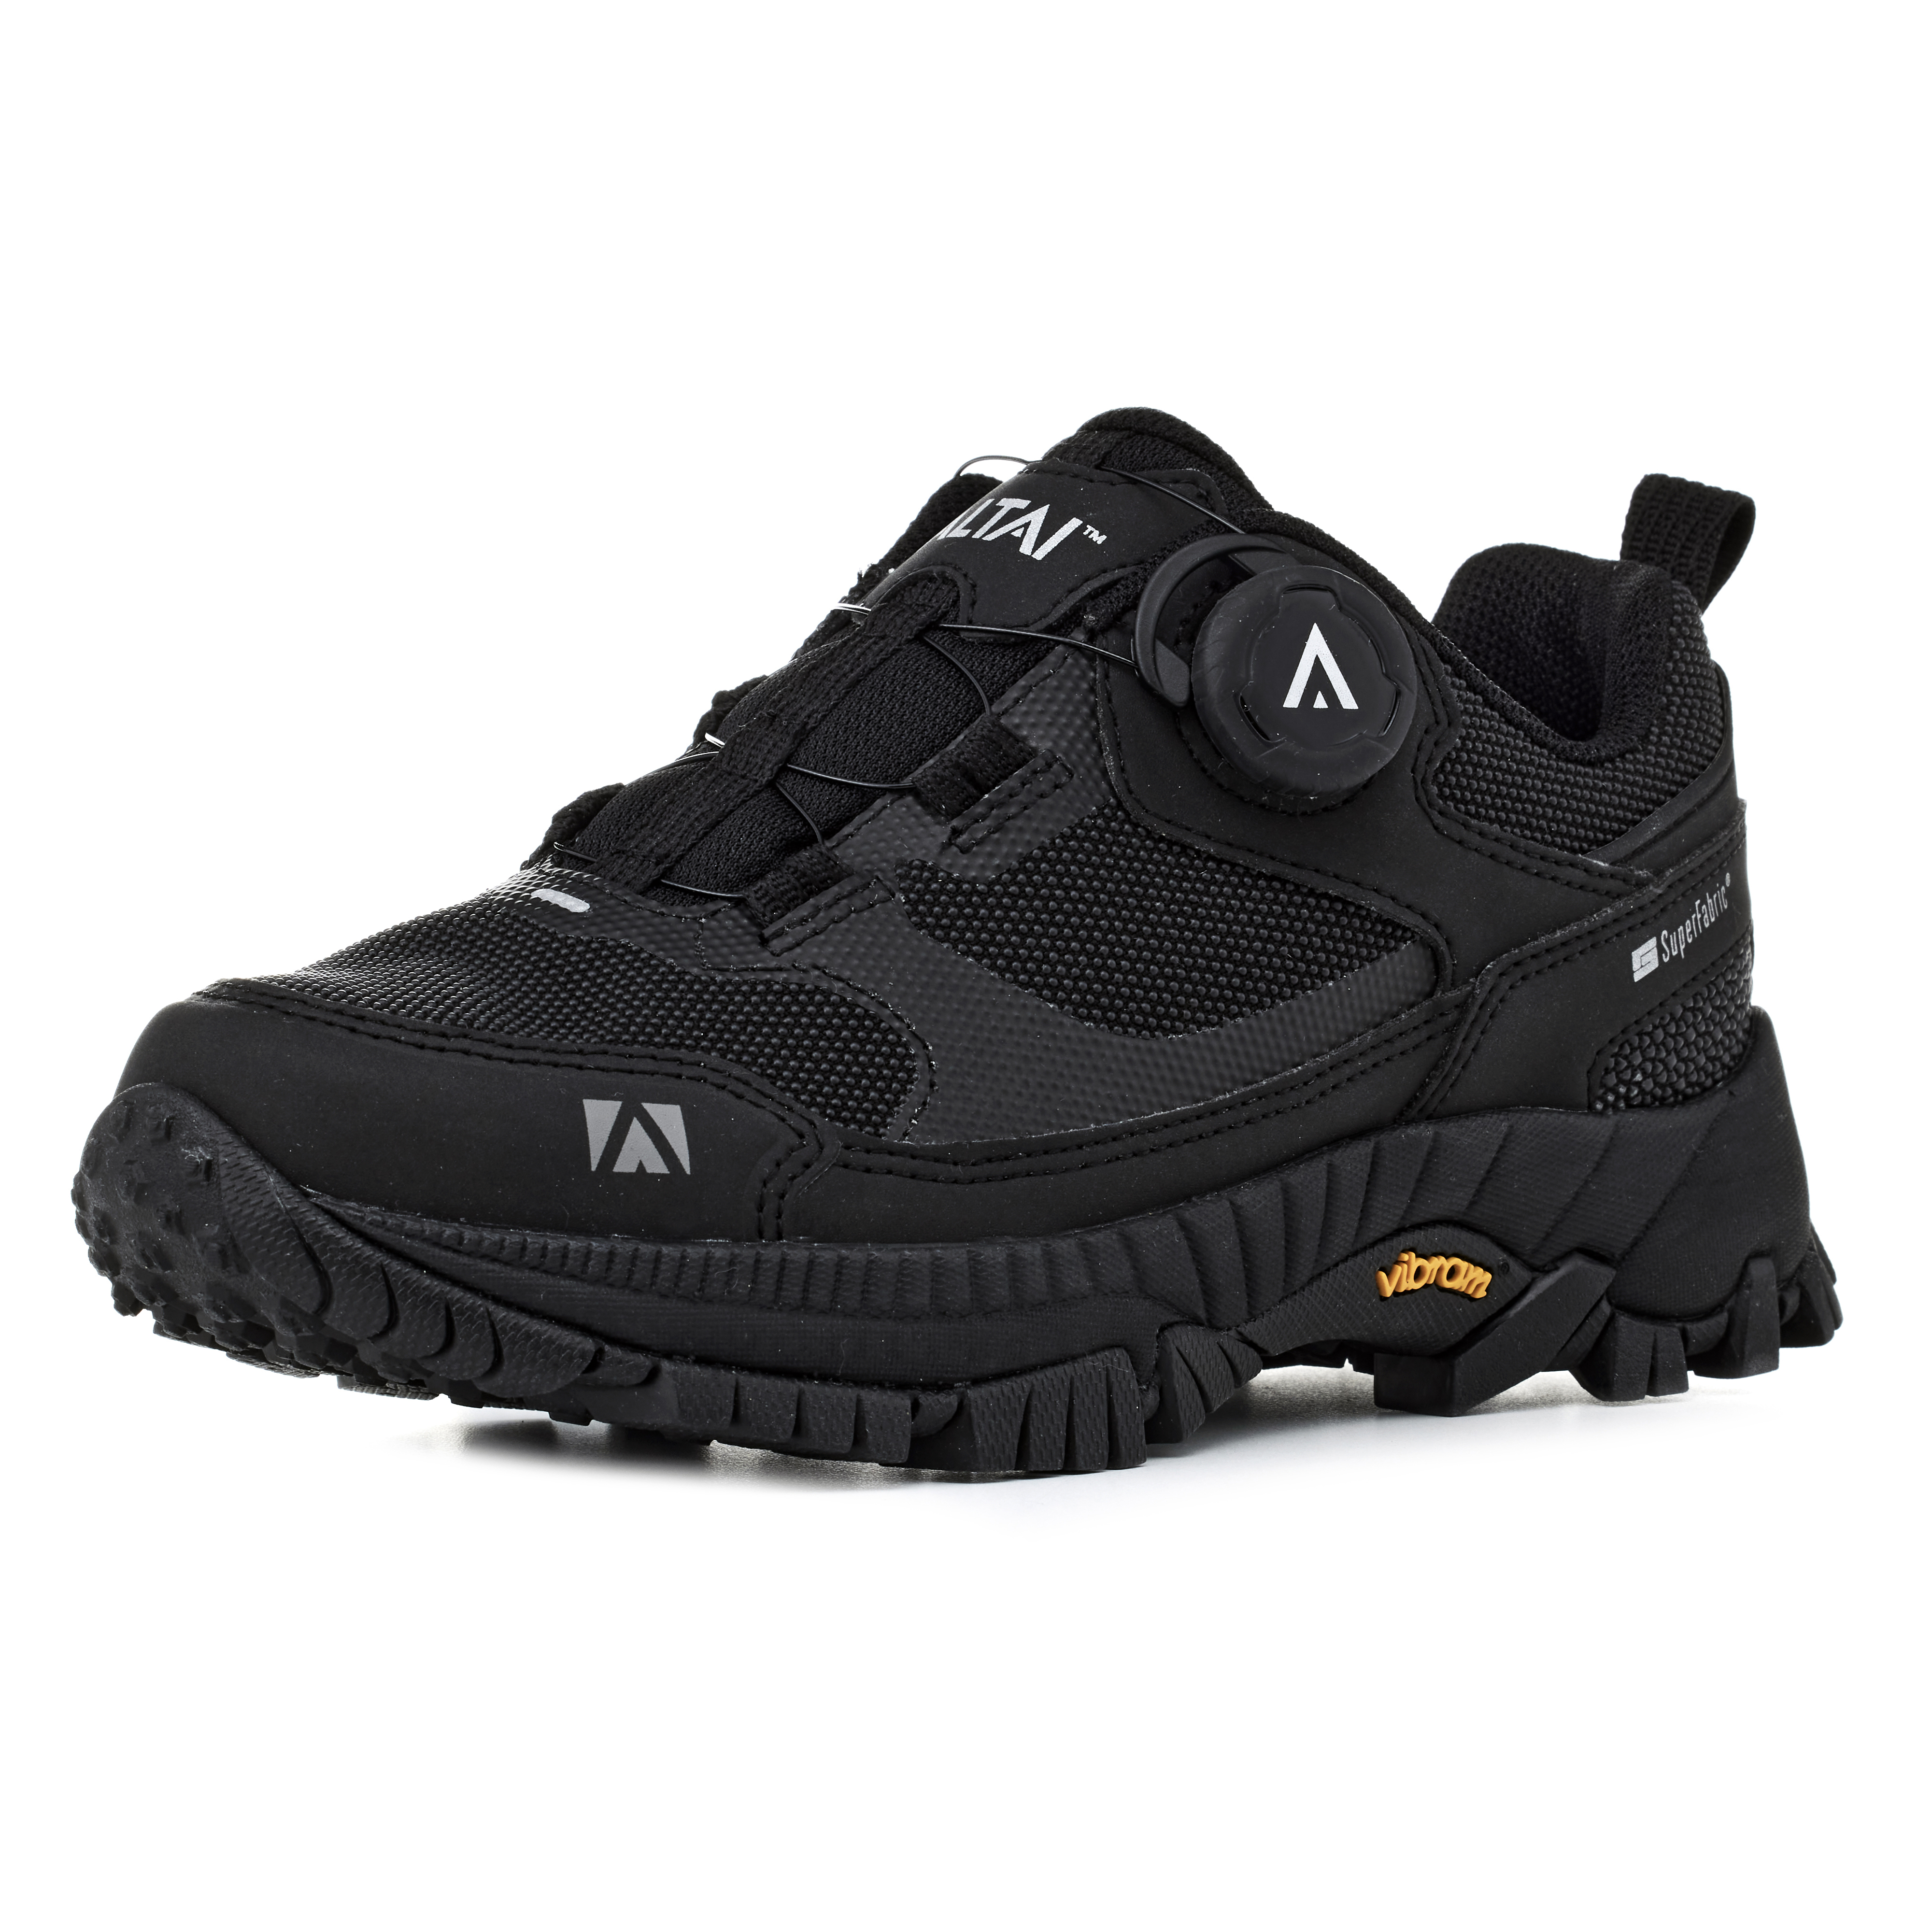 Altai - Chaser Dial-Low Hiking Trekking Shoes